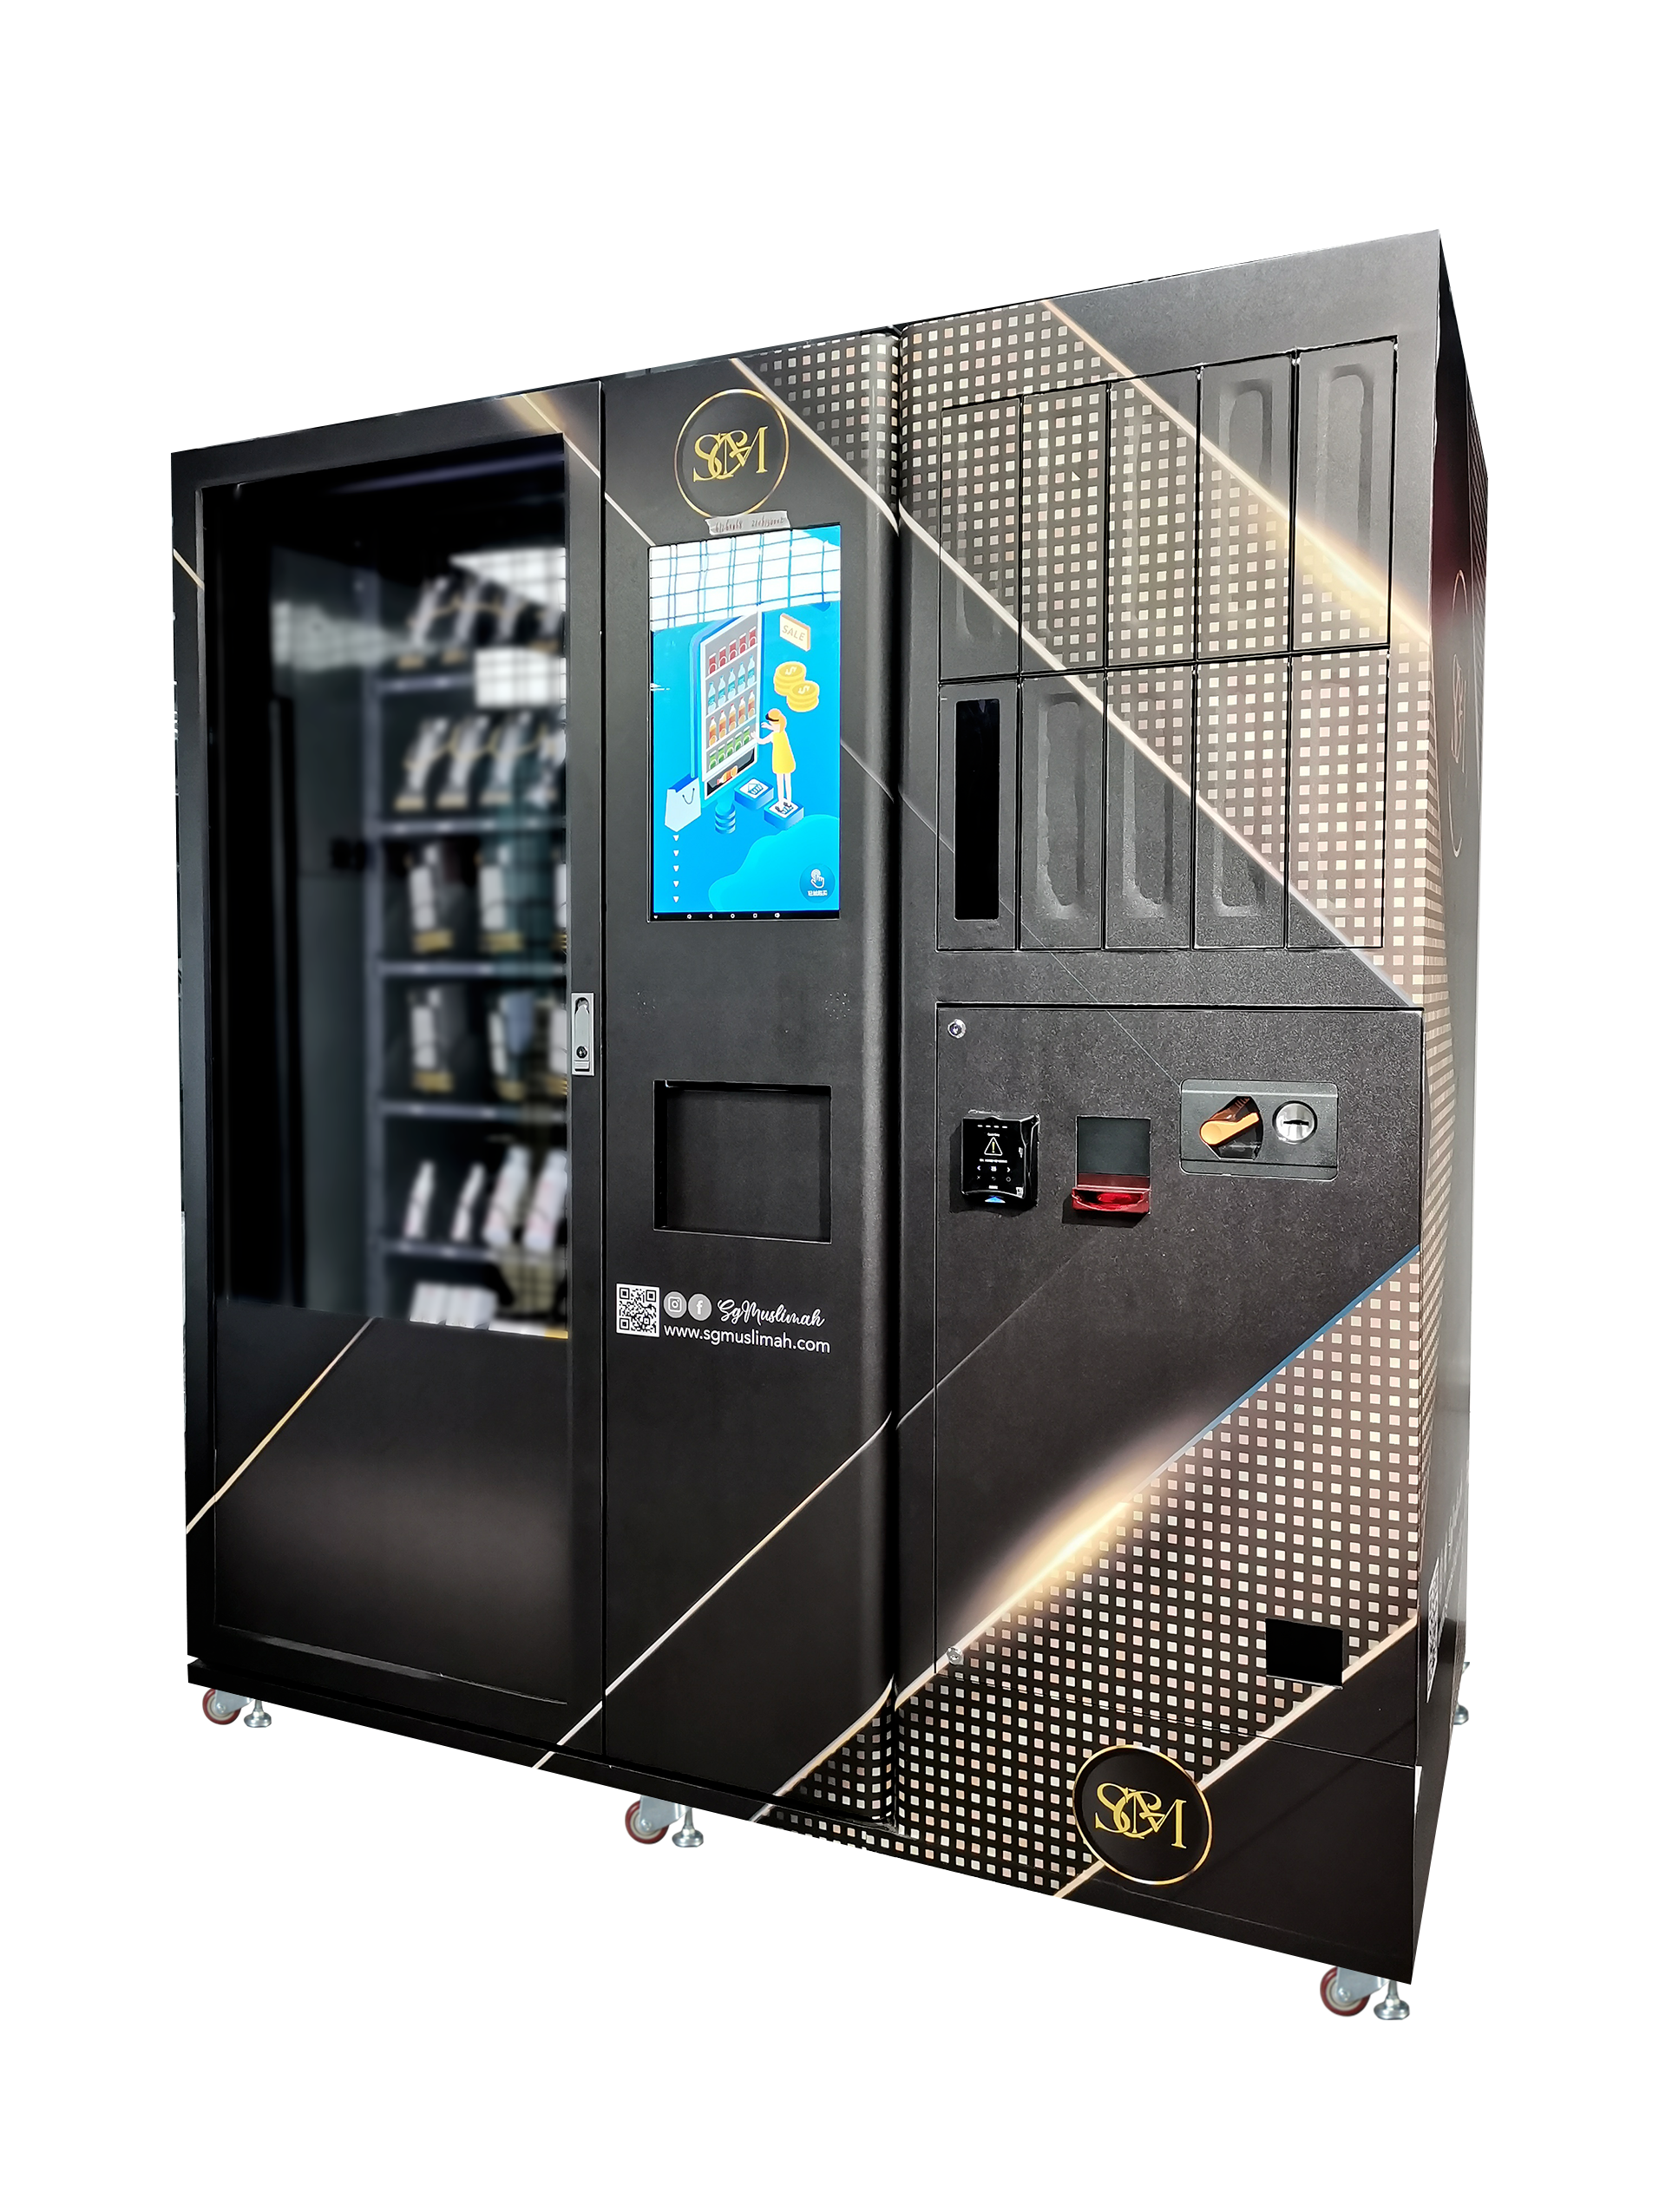 Mystery/gift box vending machine cooperate with Benz